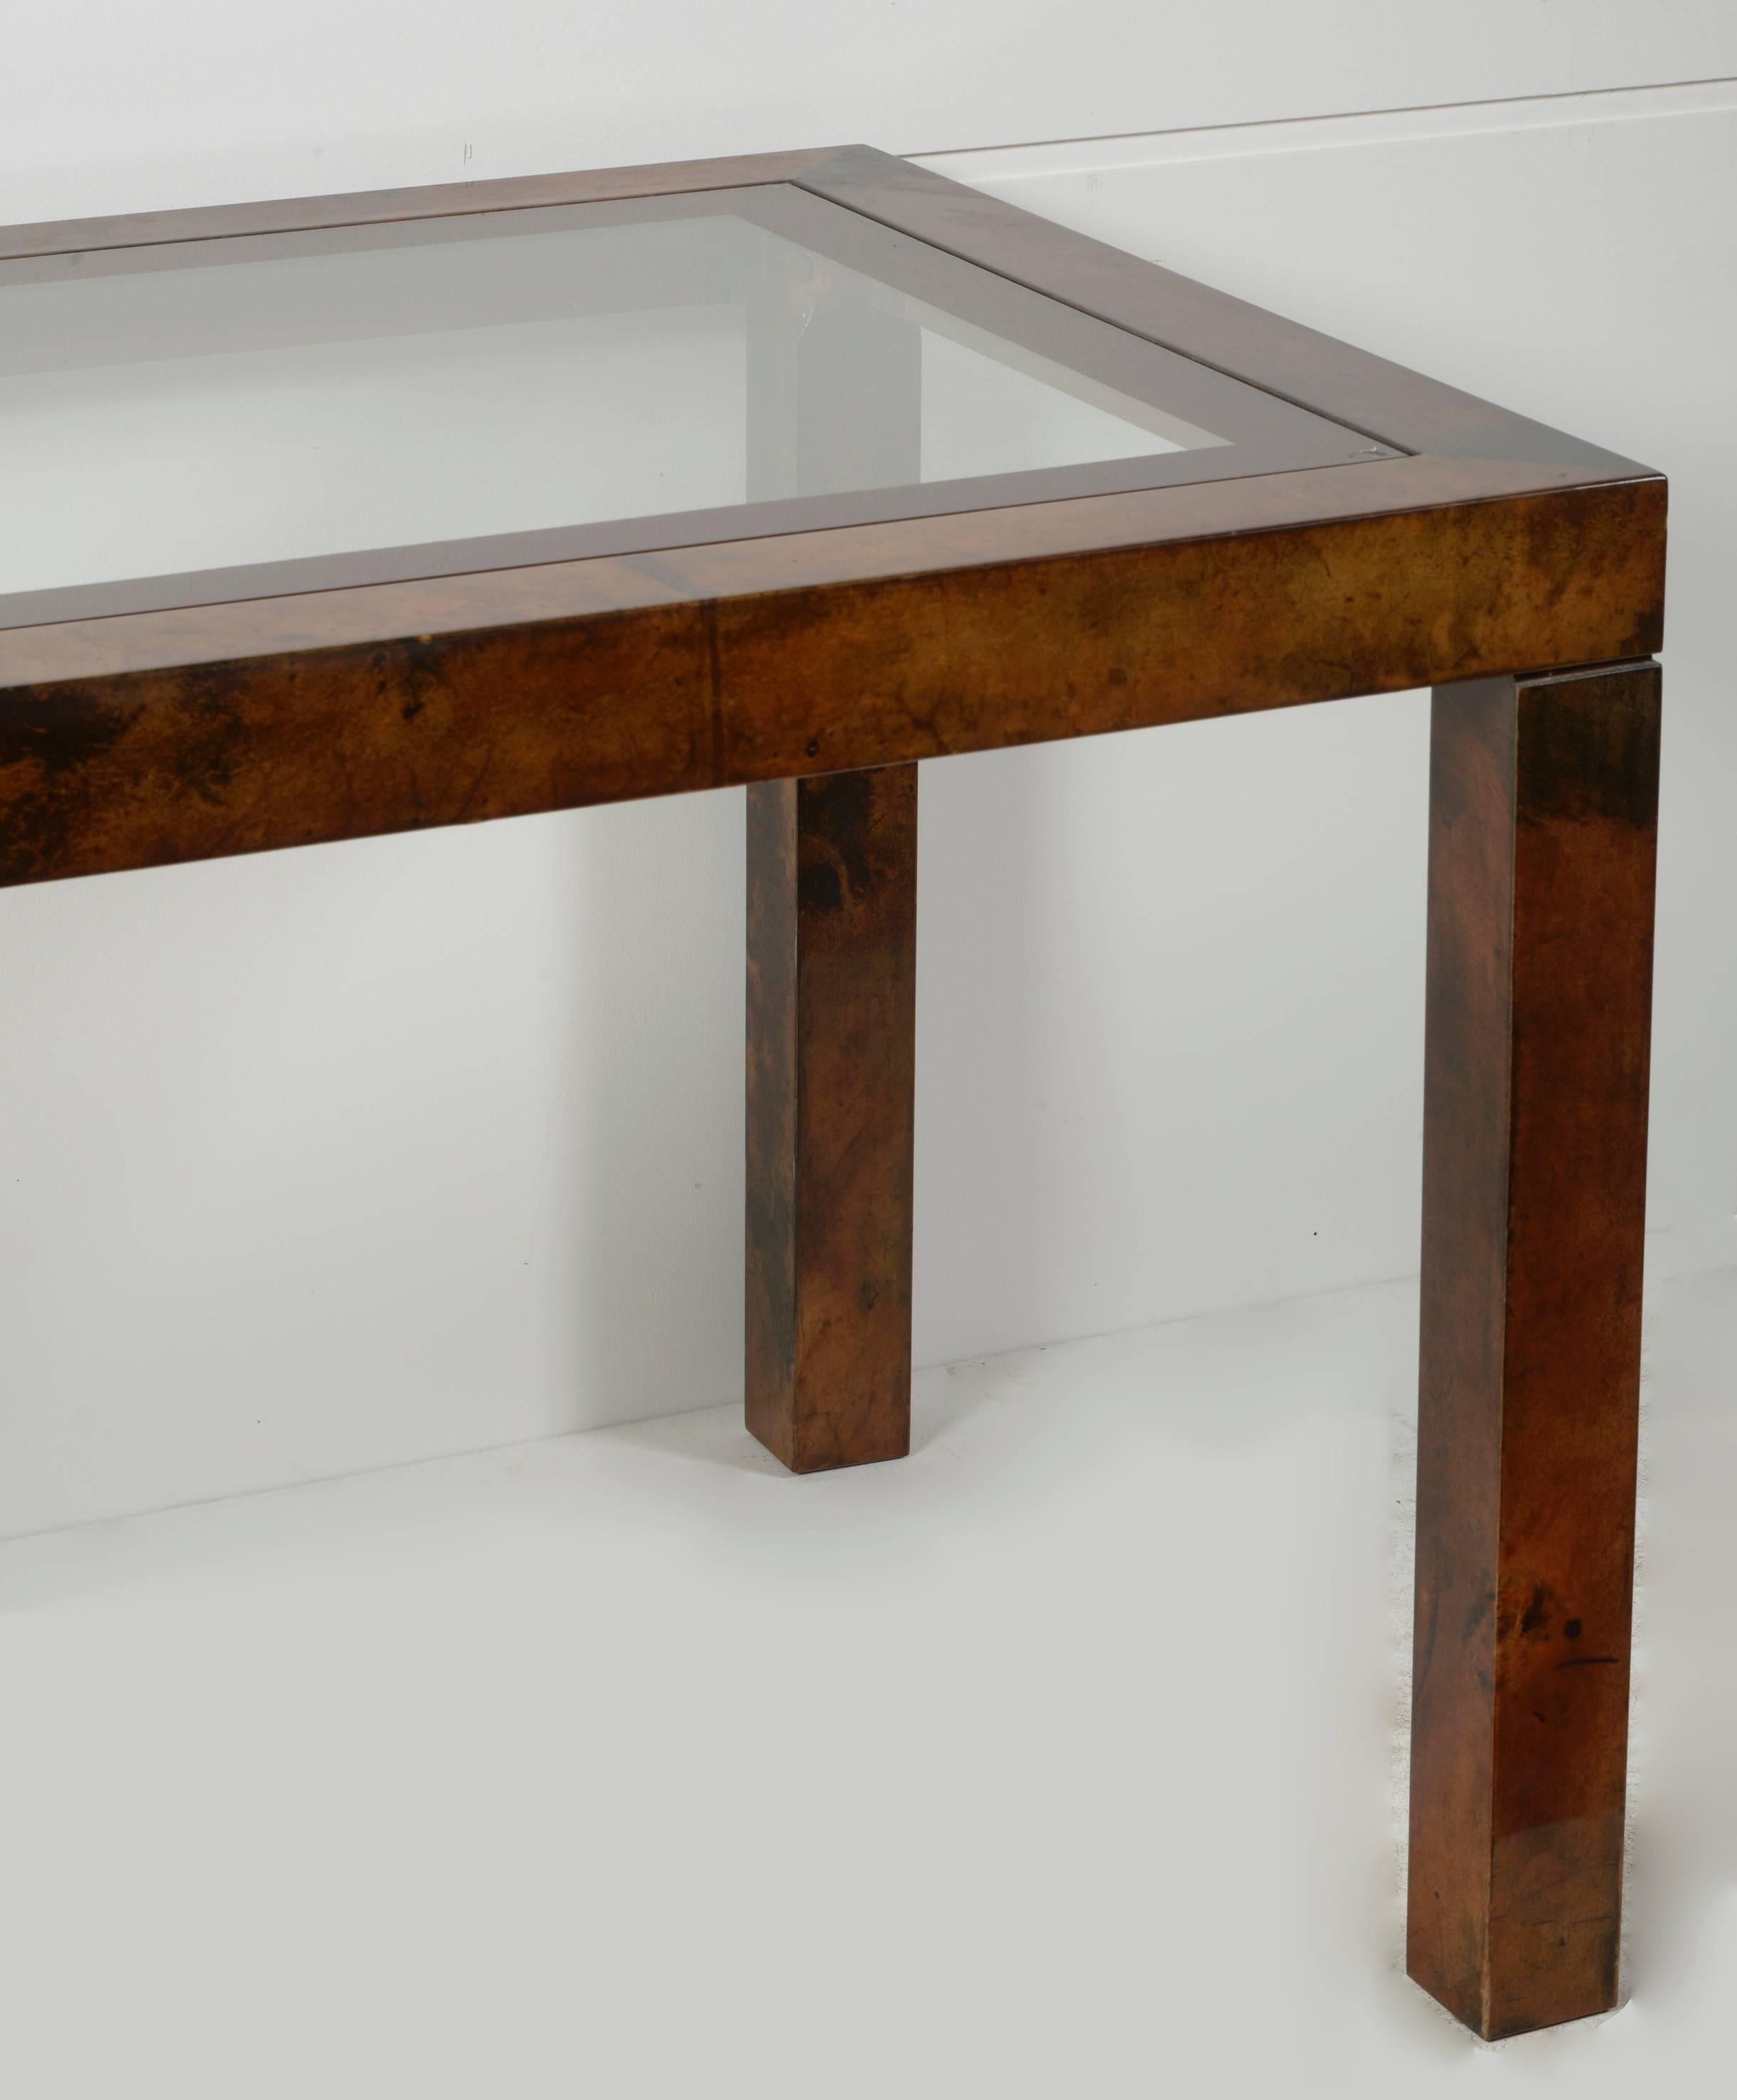 Aldo Tura Lacquered Goatskin Center or Dining Table In Excellent Condition For Sale In Brussels, BE